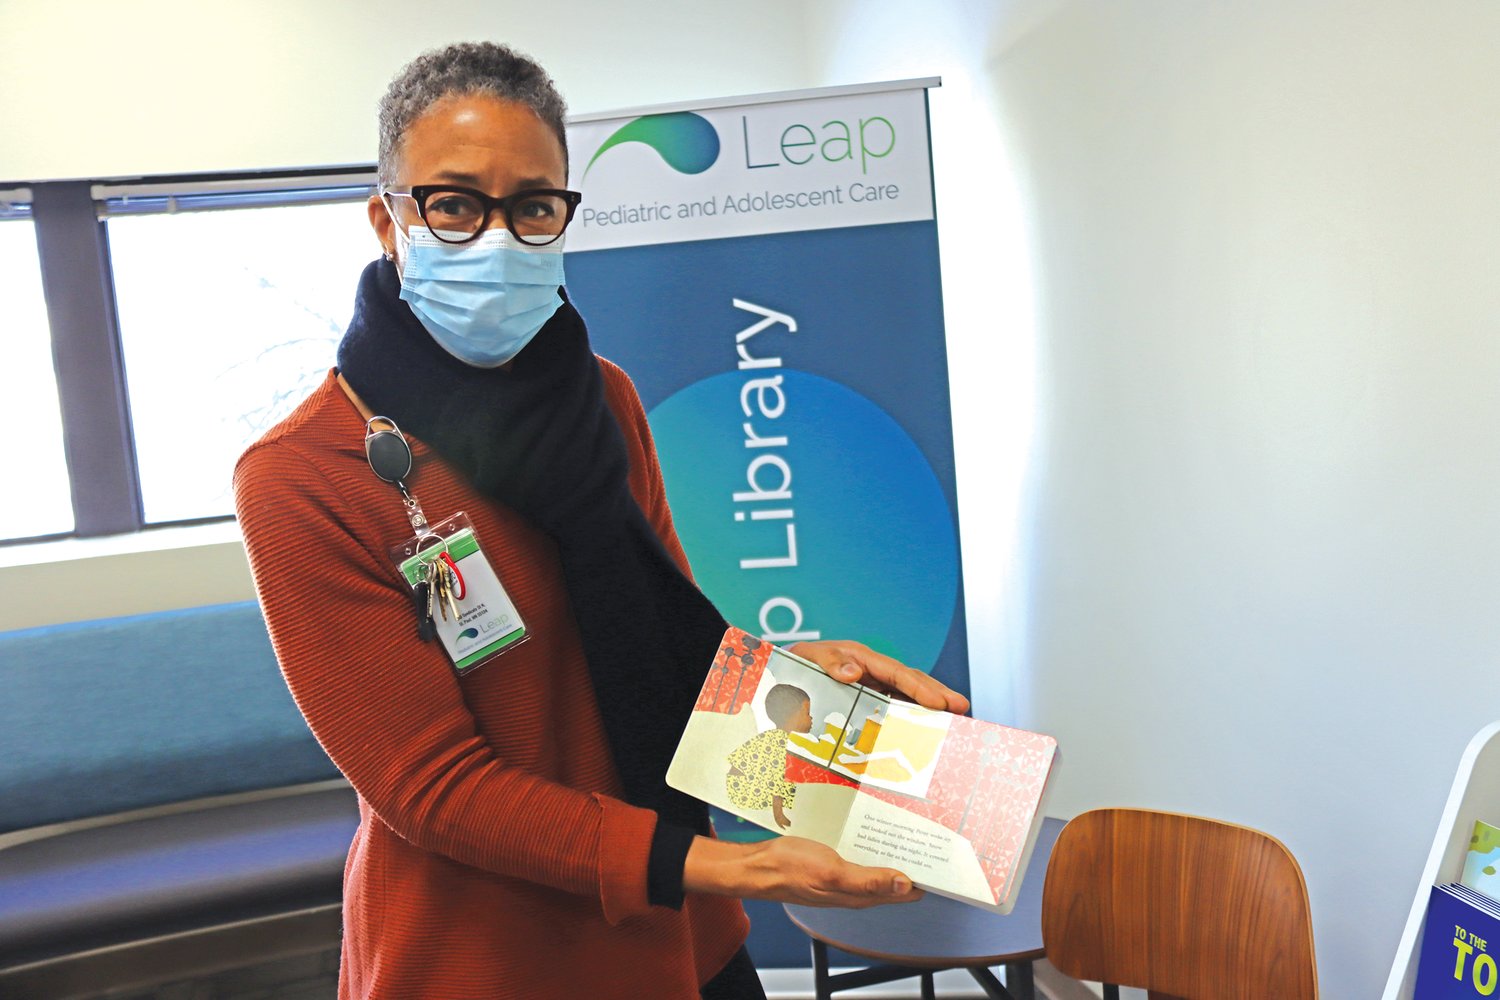 Leap Pediatric and Adolescent Care is a Reach Out and Read Clinic. Not only do kids get to take home books at well-child visits, but Dr. Julia Joseph-Di Caprio reads to them at visits. (Photo by Tesha M. Christensen)